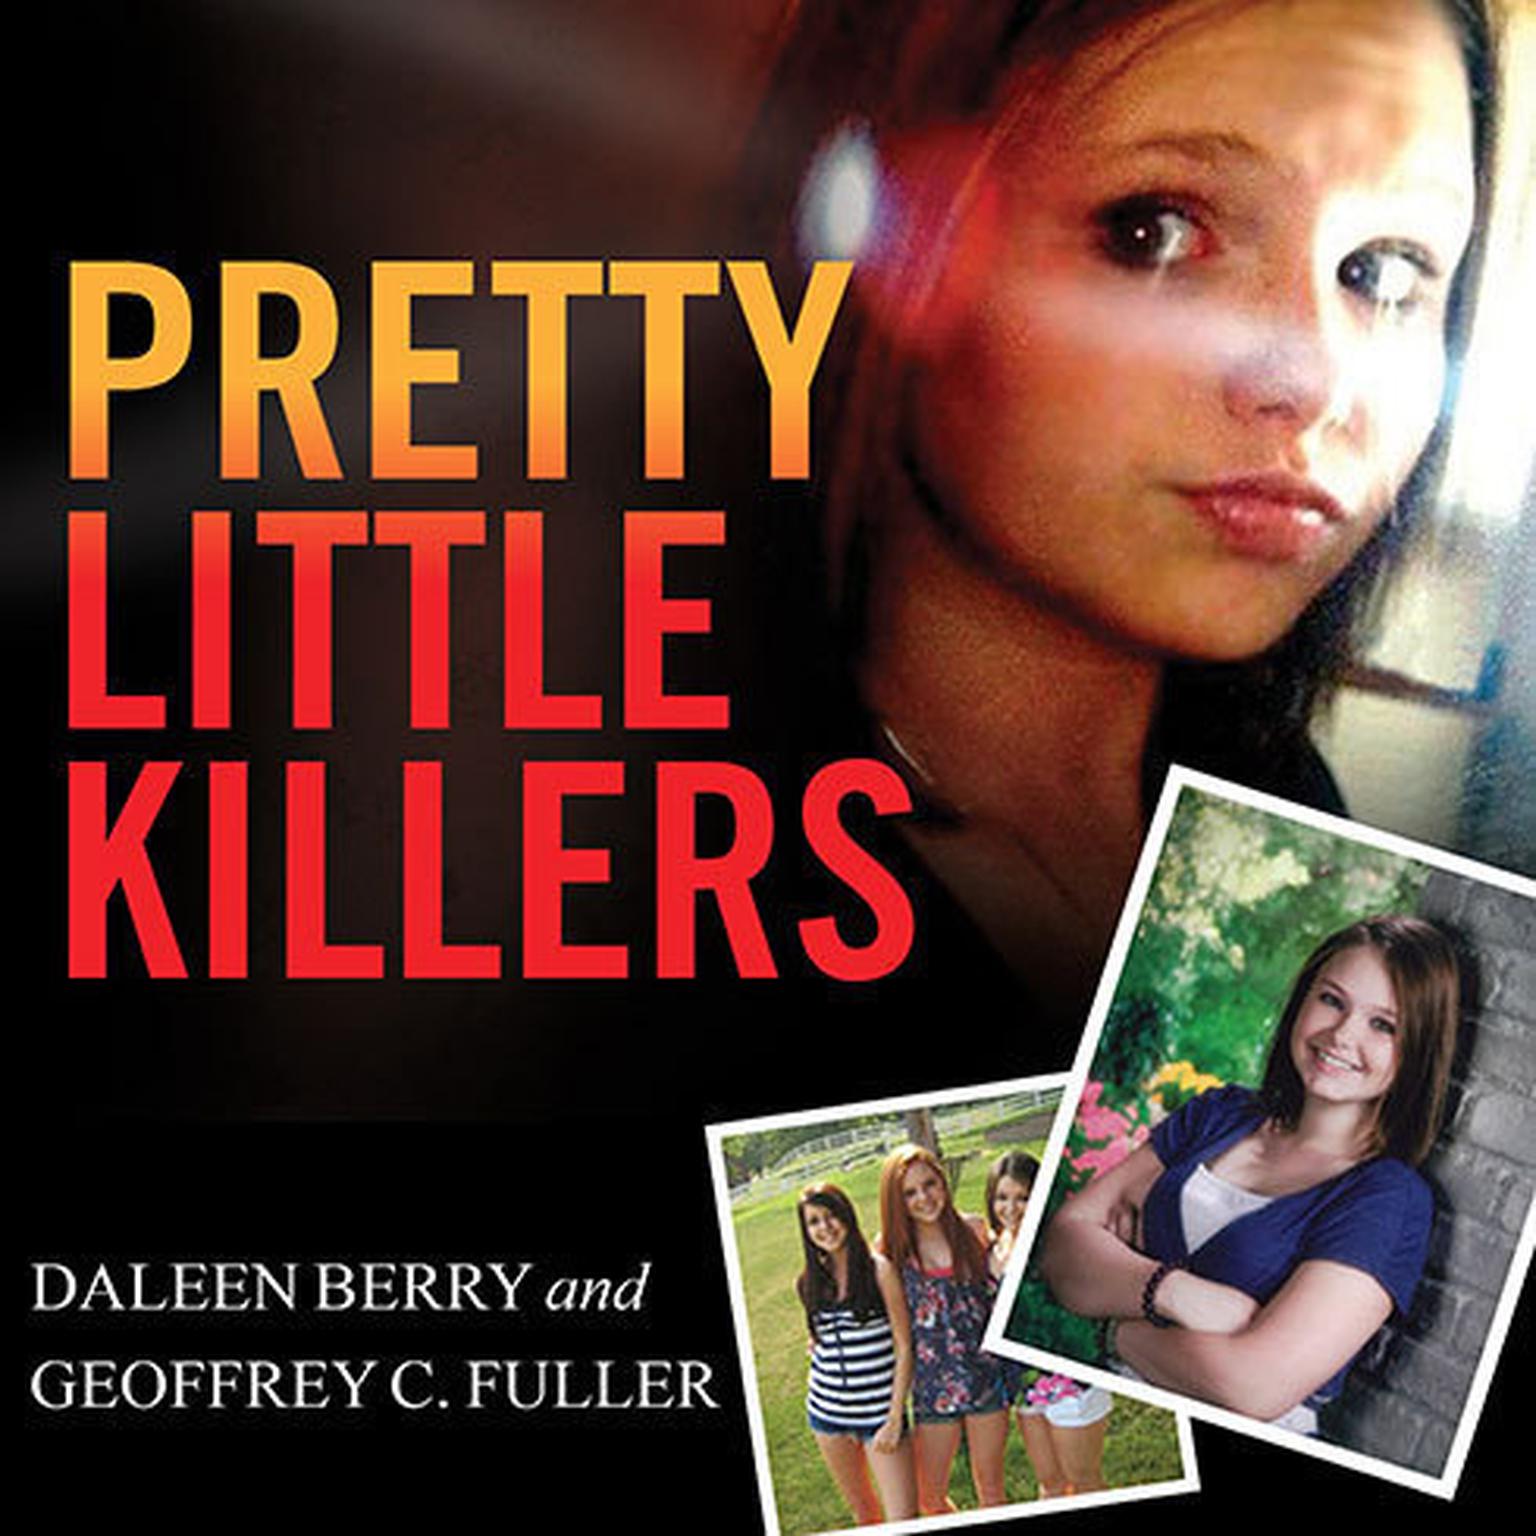 Pretty Little Killers: The Truth Behind the Savage Murder of Skylar Neese Audiobook, by Daleen Berry